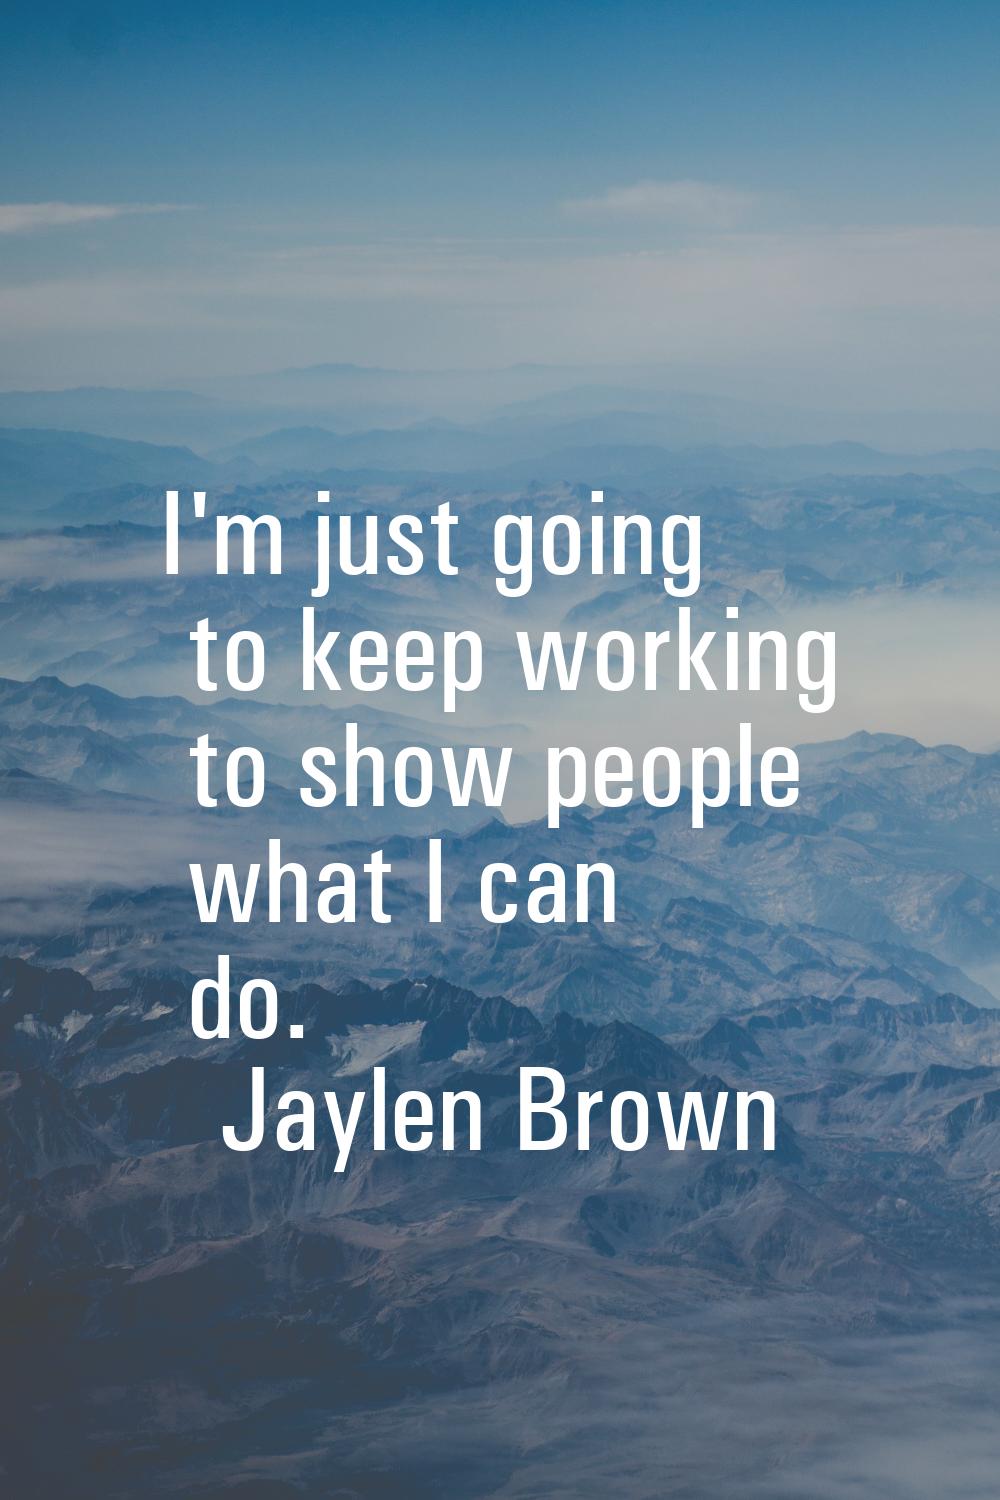 I'm just going to keep working to show people what I can do.